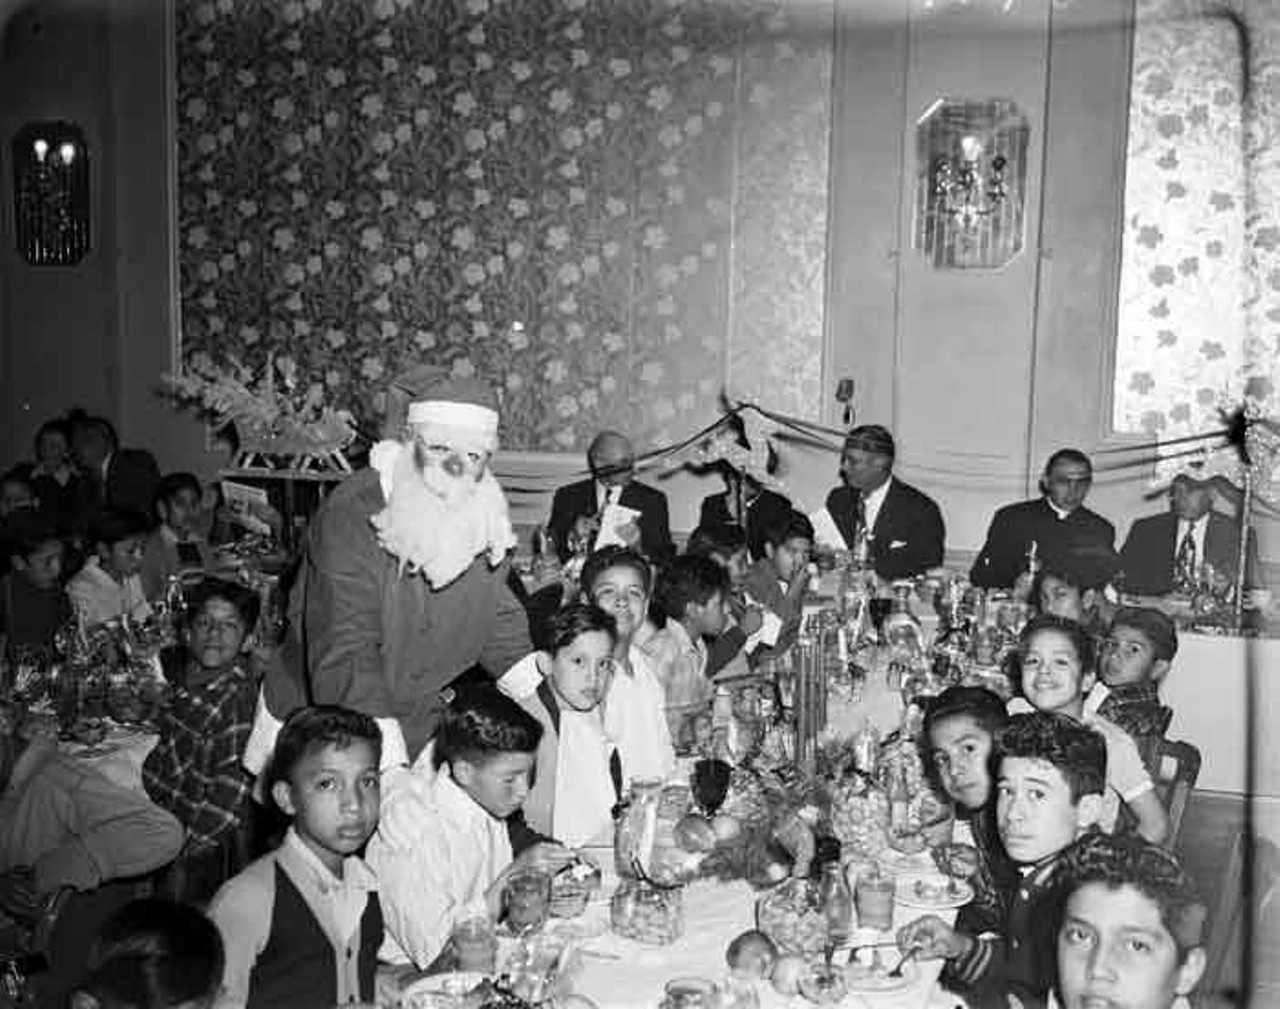 Santa made the rounds at the Newsboys' Christmas Dinner, probably finding out just what everyone wanted to find under the tree on Christmas morning!